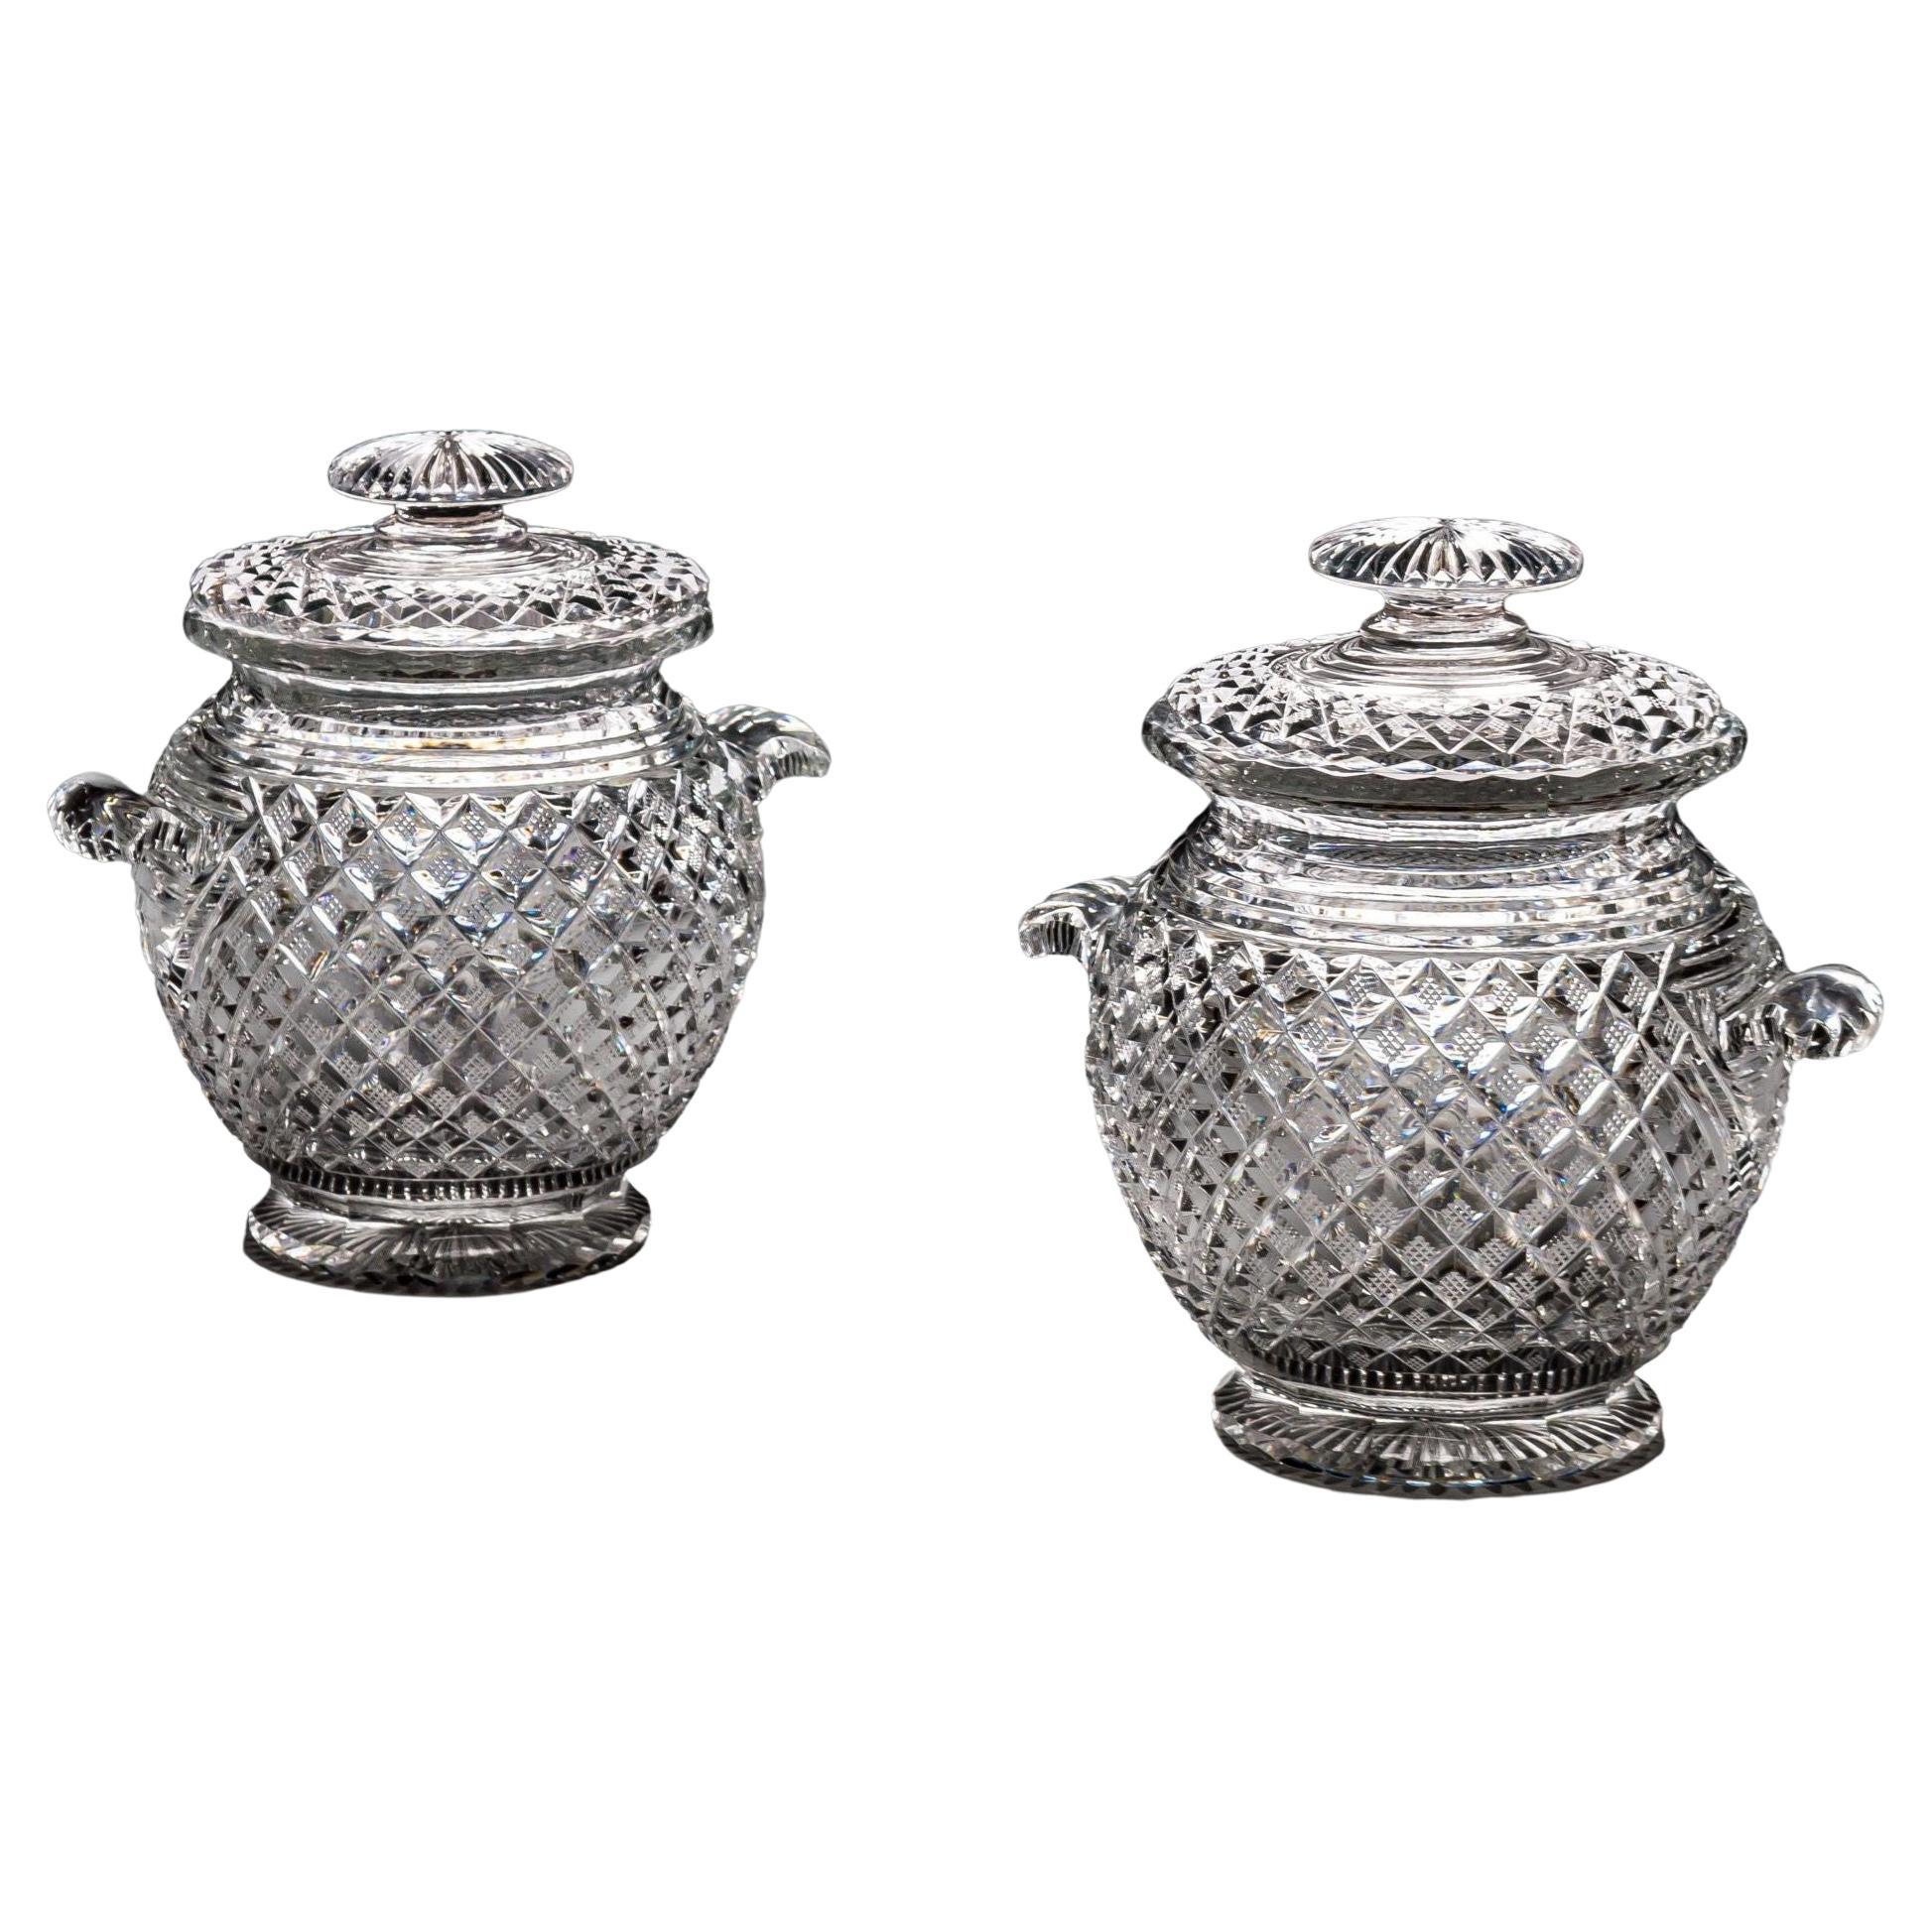 An Exceptional Pair of Regency Cut Glass Ice Buckets For Sale